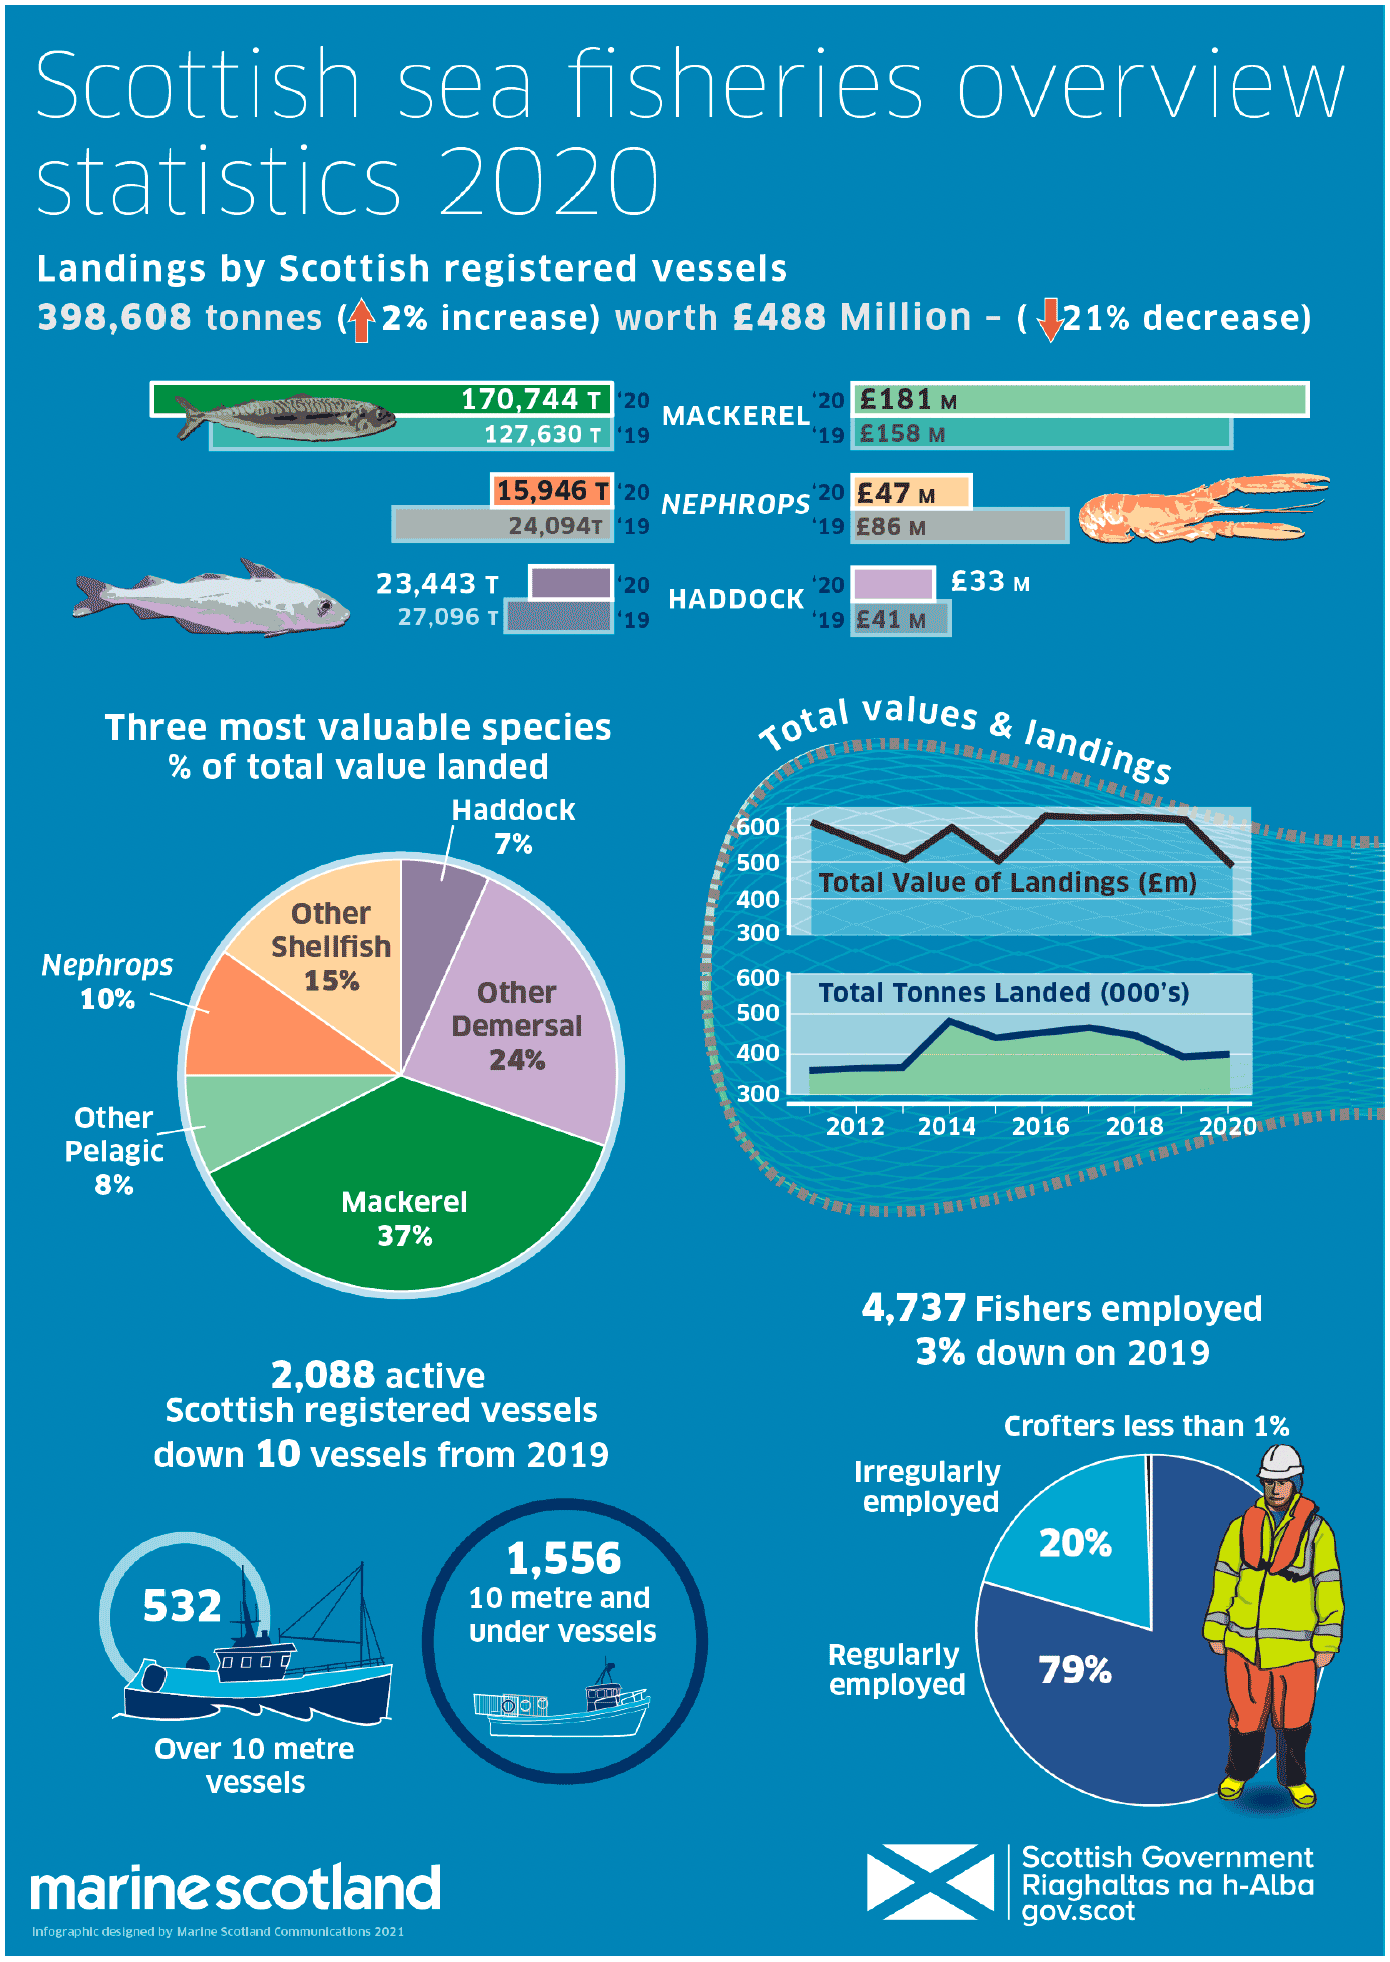 Overview Statistics Infographic of Scottish landings, fleet and employment in 2020